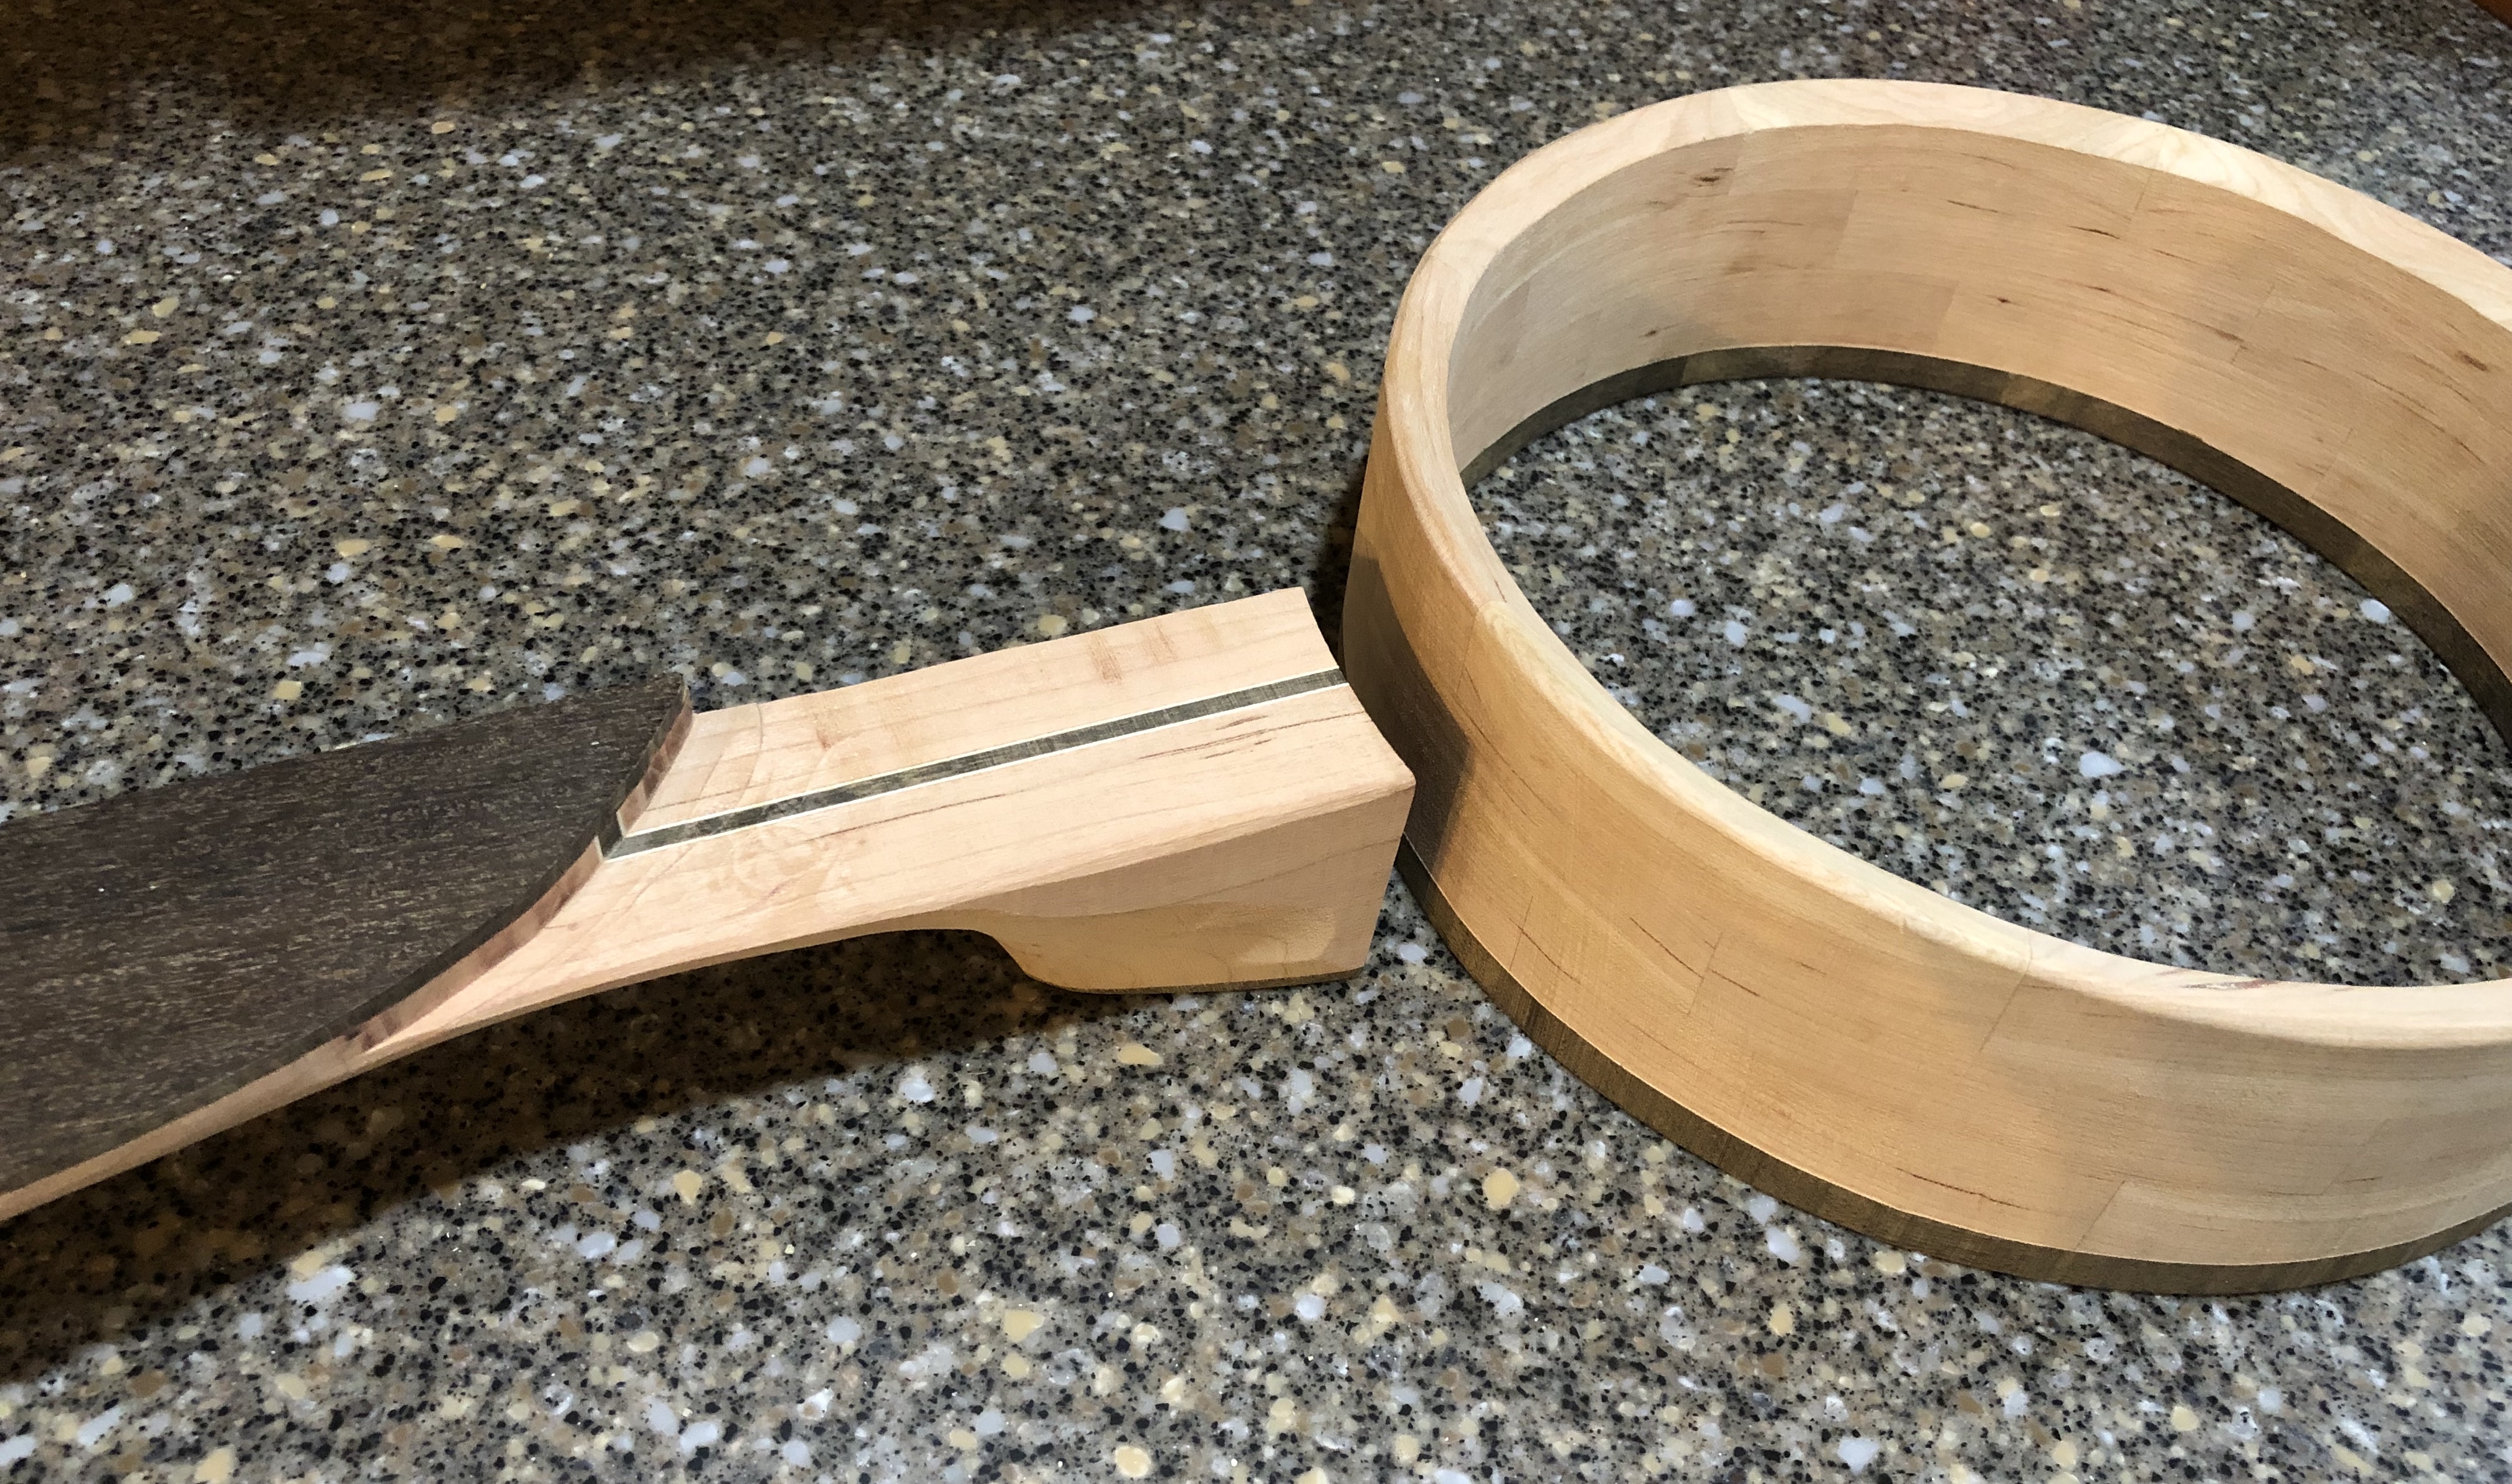 Carving the neck to fit the rim